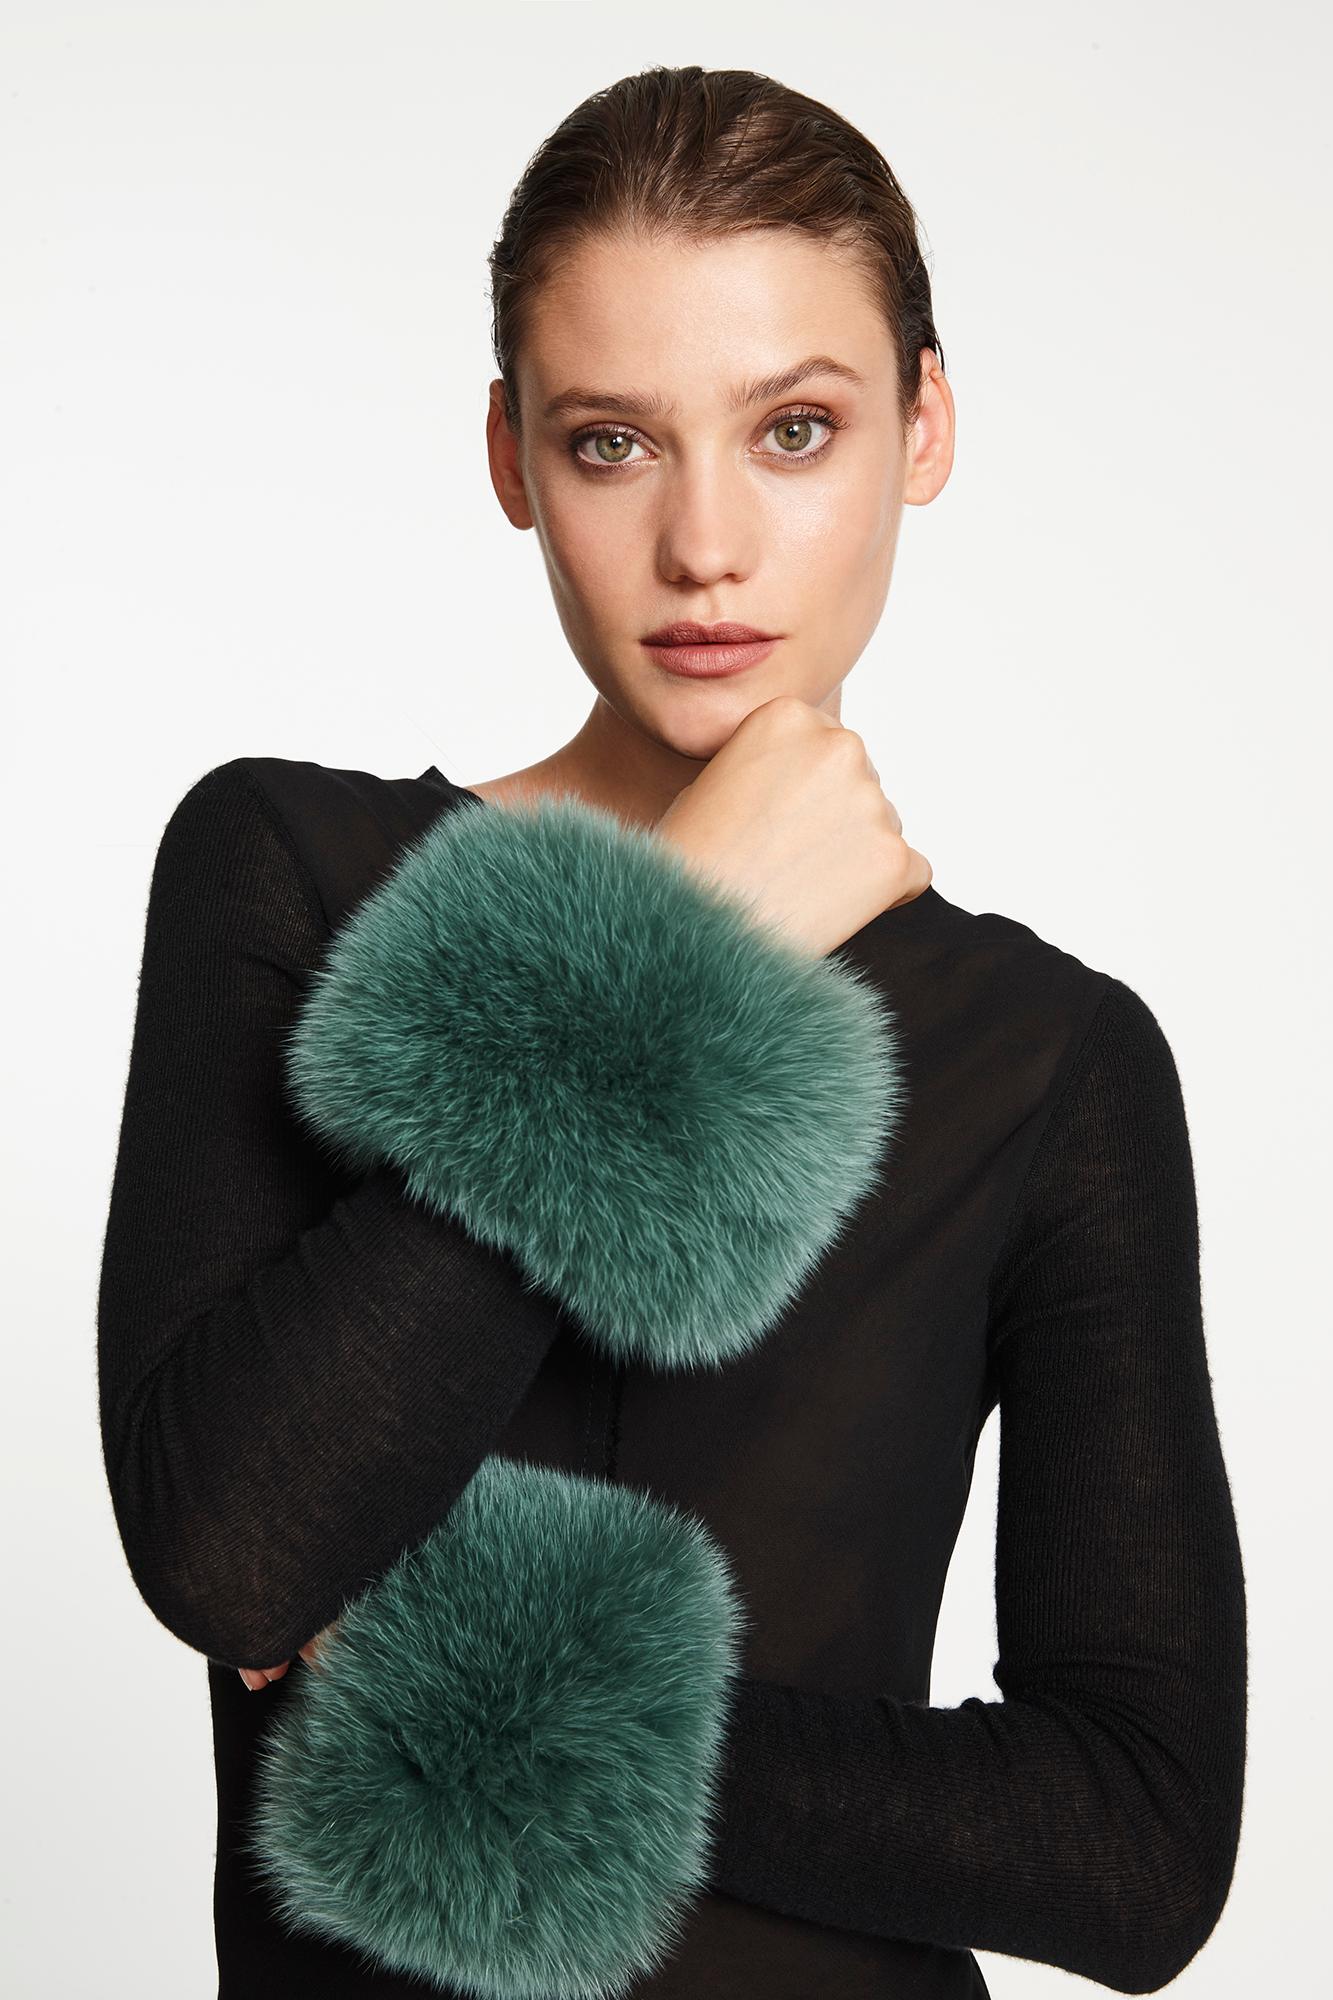 Verheyen London Snap on Fox Cuffs are the perfect accessory for winter/autumn dressing. Wear over any jumper or coat, these cuffs will jazz up any look and keep you staying cosy with style. 




All fur is origin assured and ethically sourced from